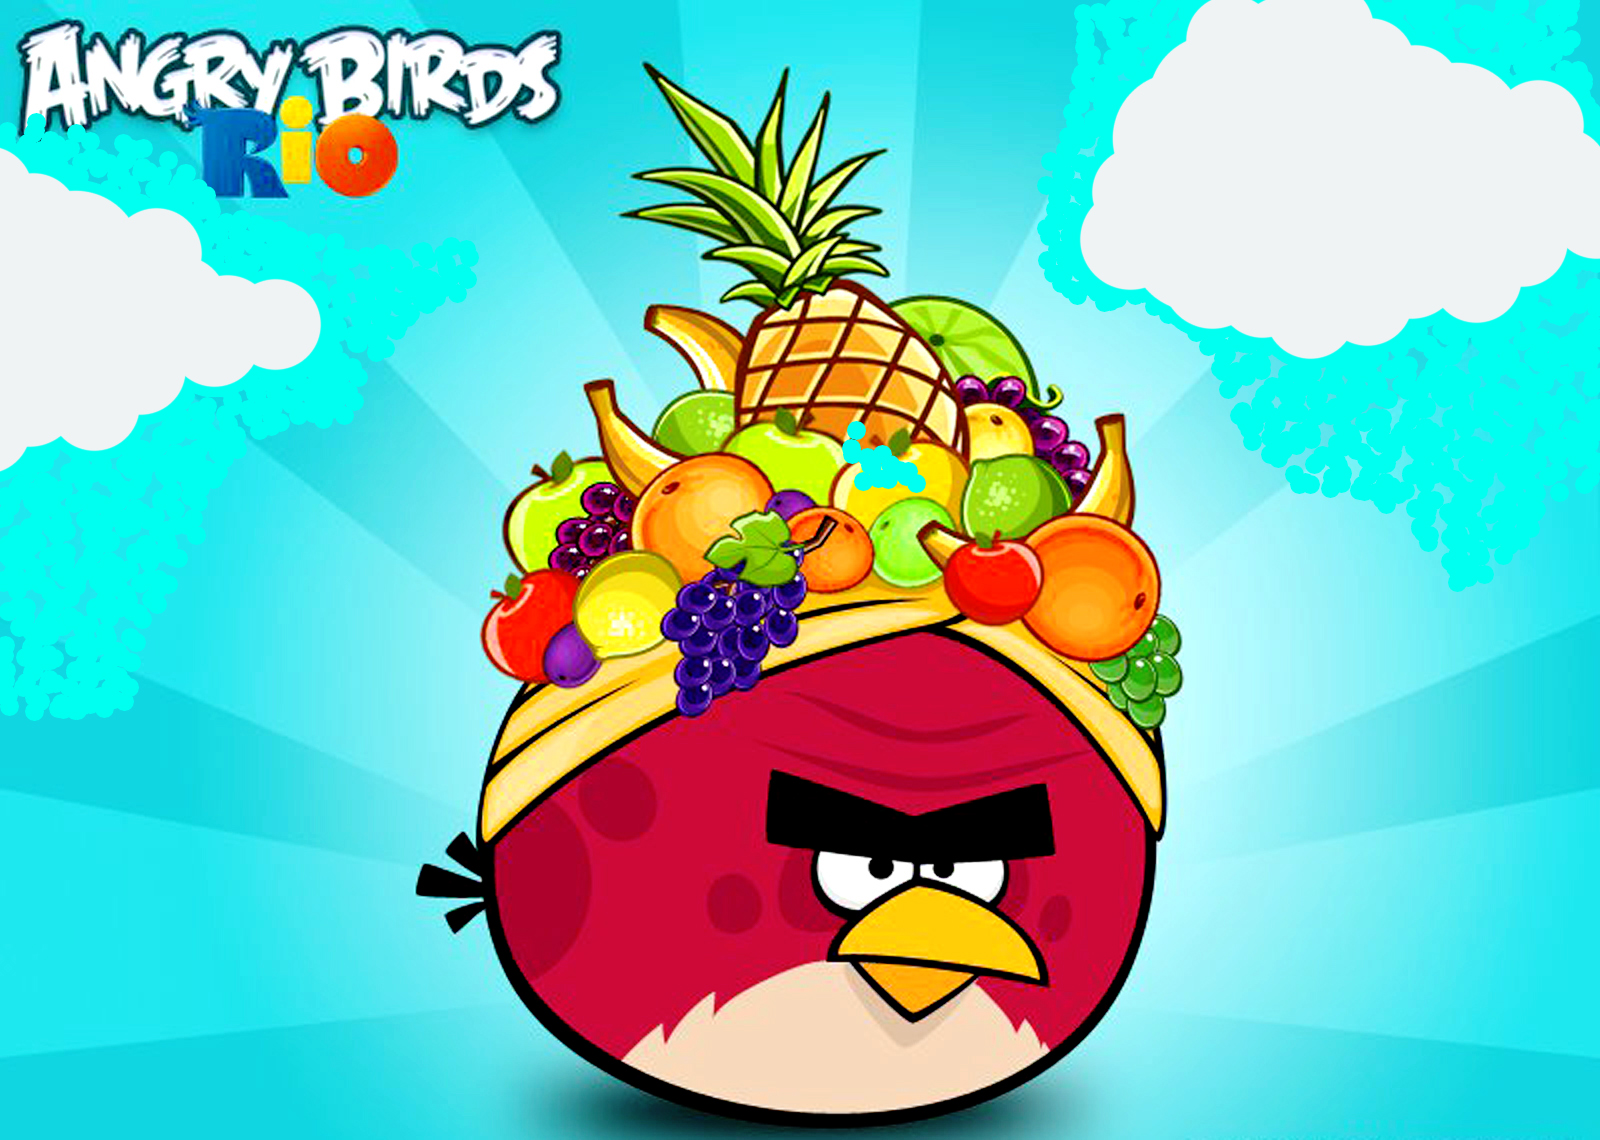 Angry Birds  Game  HD Wallpapers  HD Wallpapers  Backgrounds  